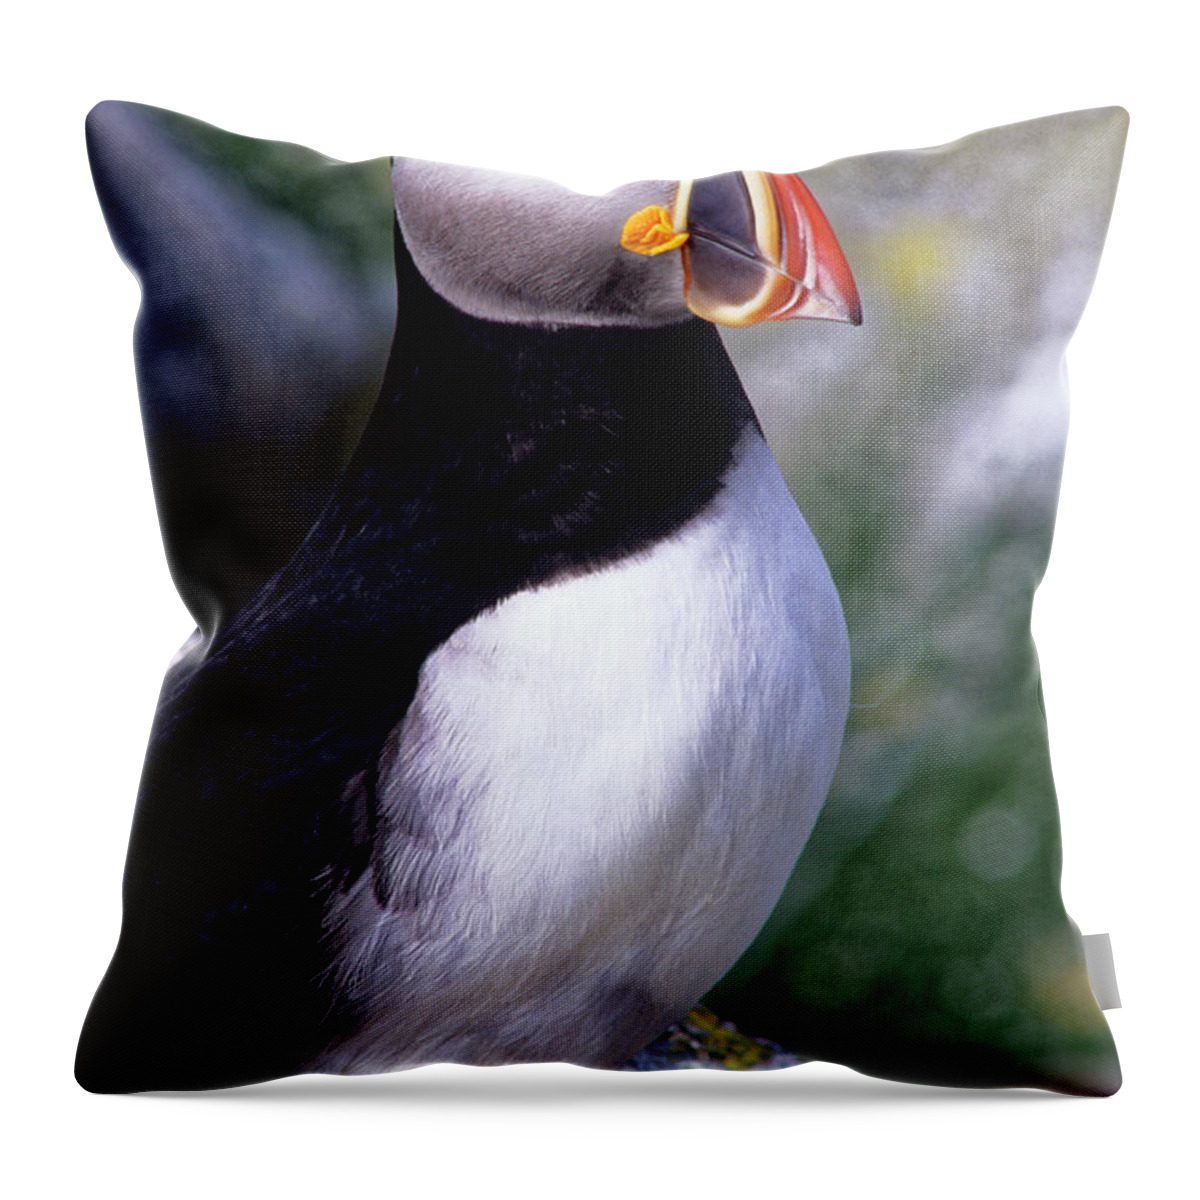 Puffin Throw Pillow featuring the photograph Atlantic Puffin by Kevin Shields